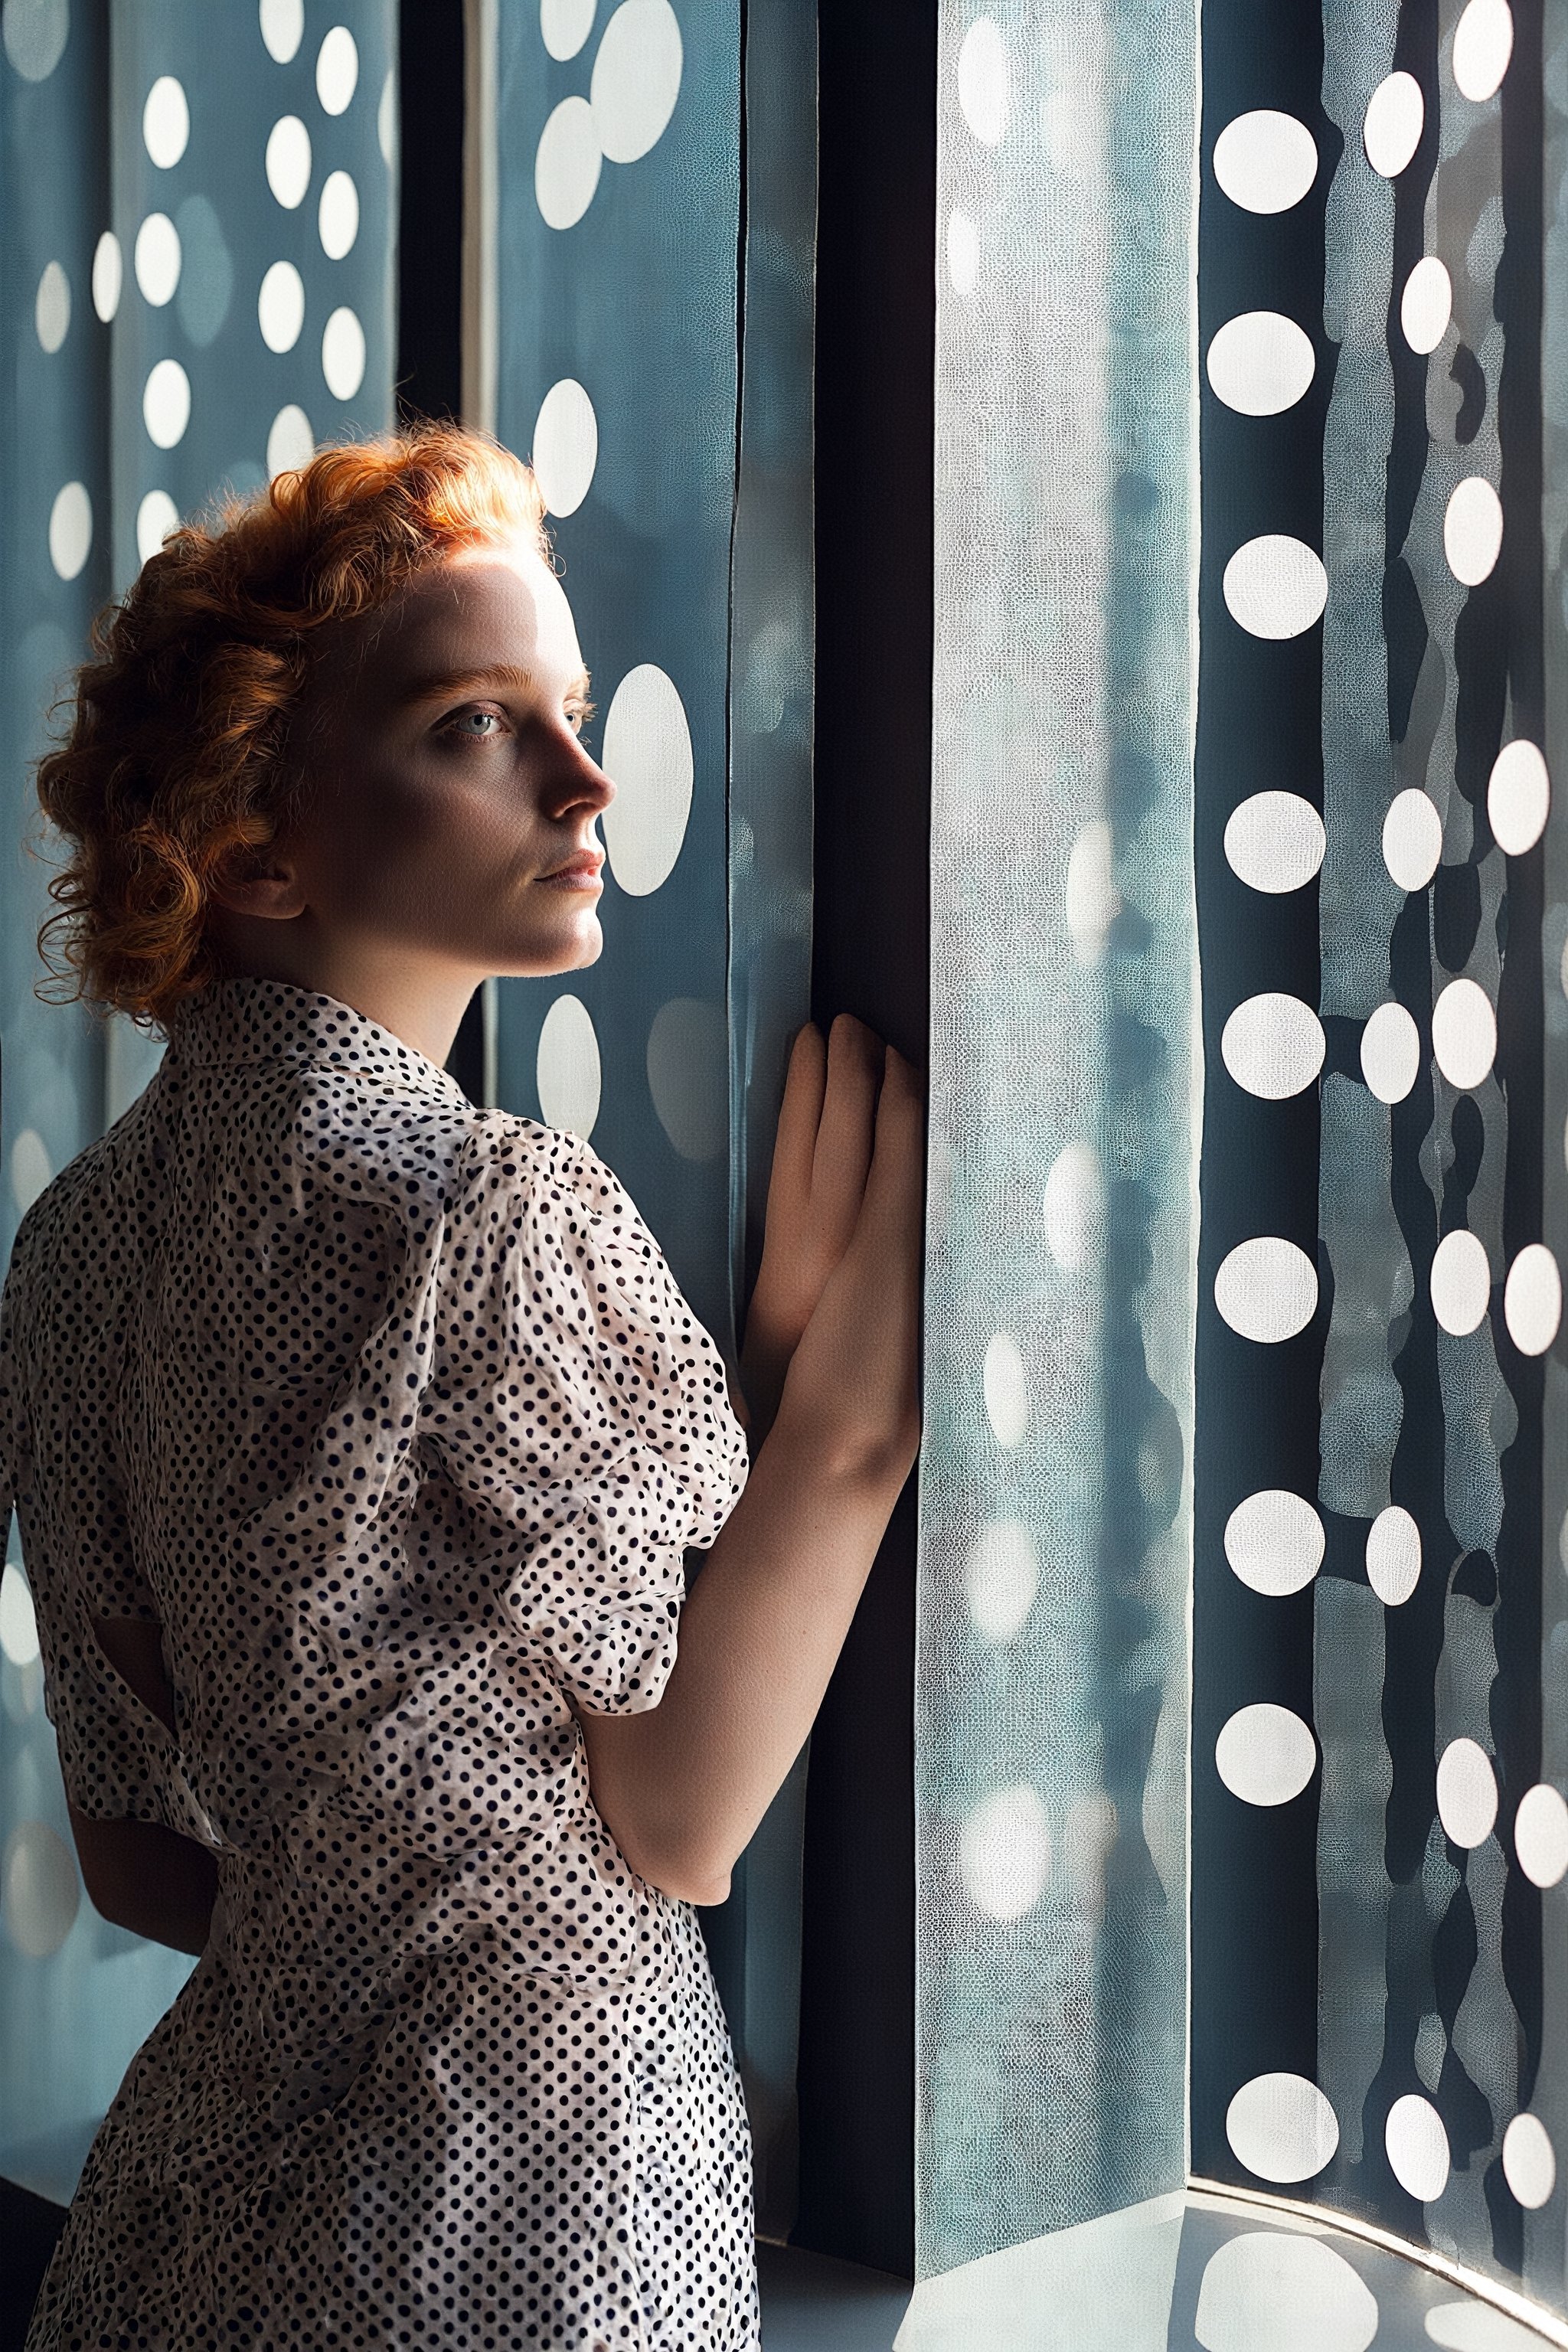 girl looks out of a window, in the style of conceptual light sculptures, polka dots, imaginative prison scenes, fashion photography, opaque resin panels, luminous shadows, close-up